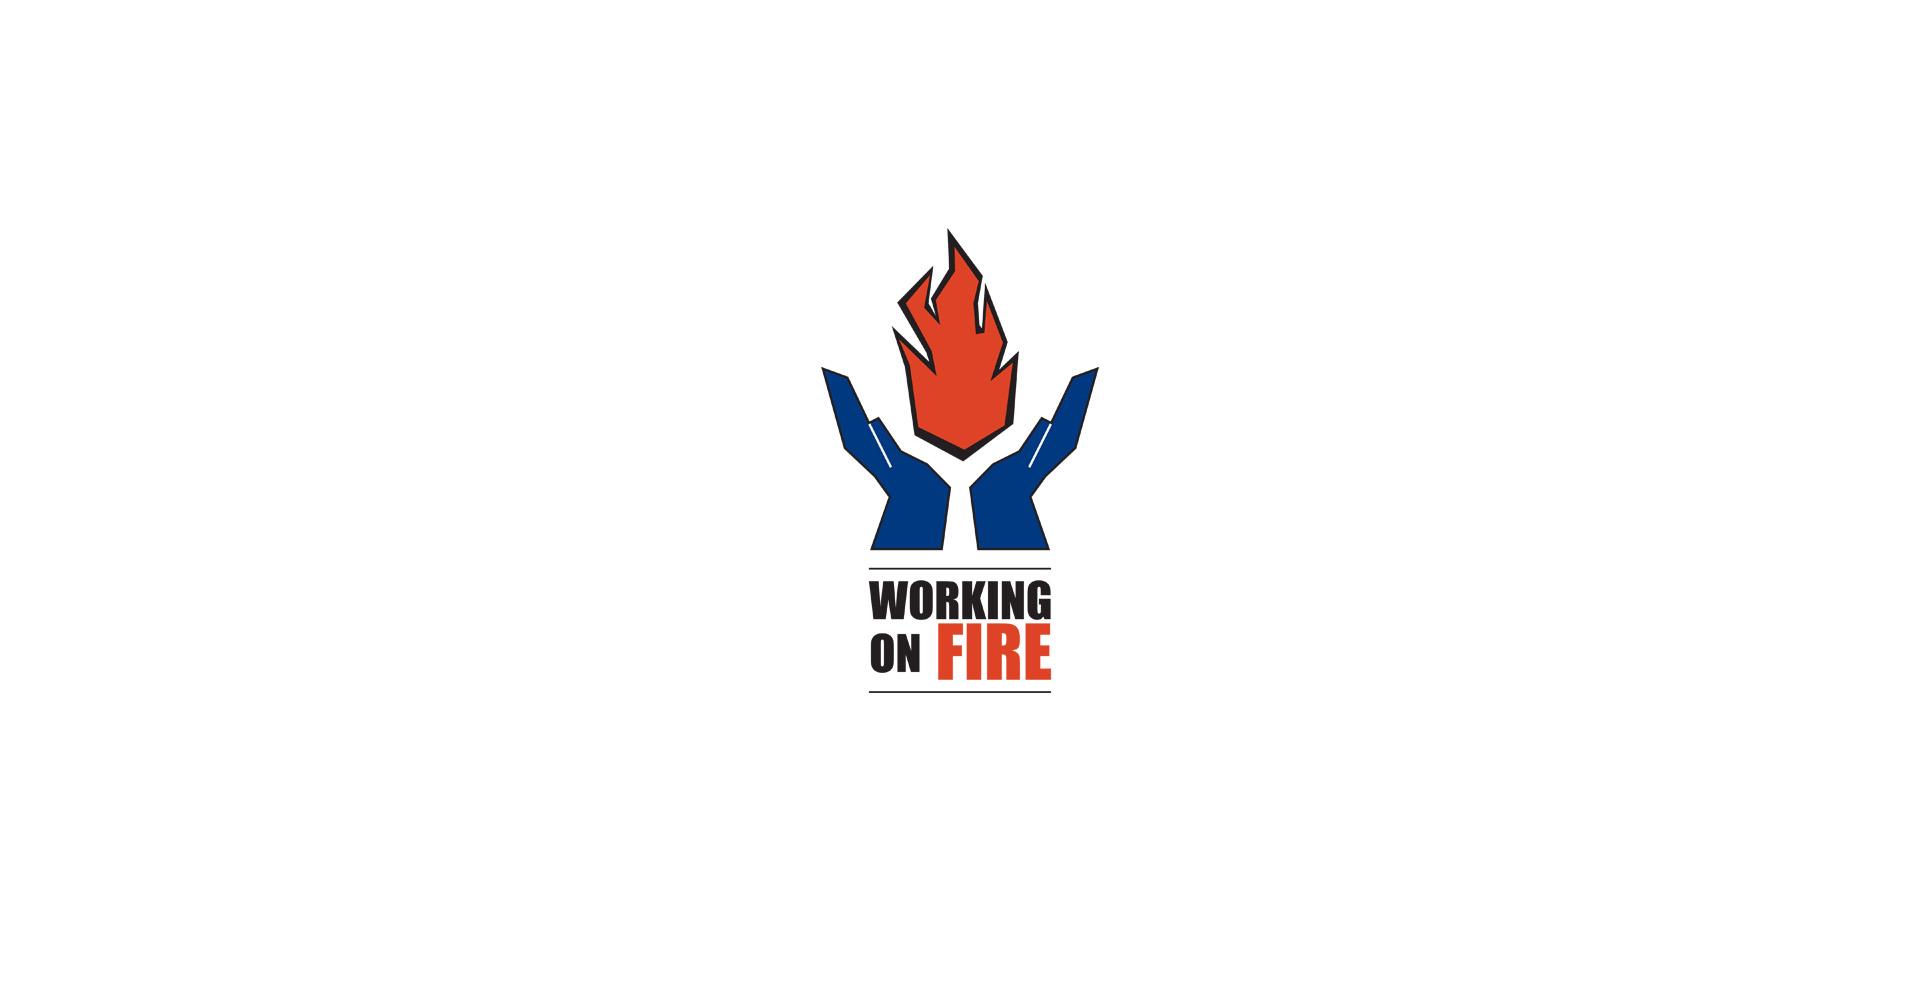 About Fire Logo - Home • Working on Fire